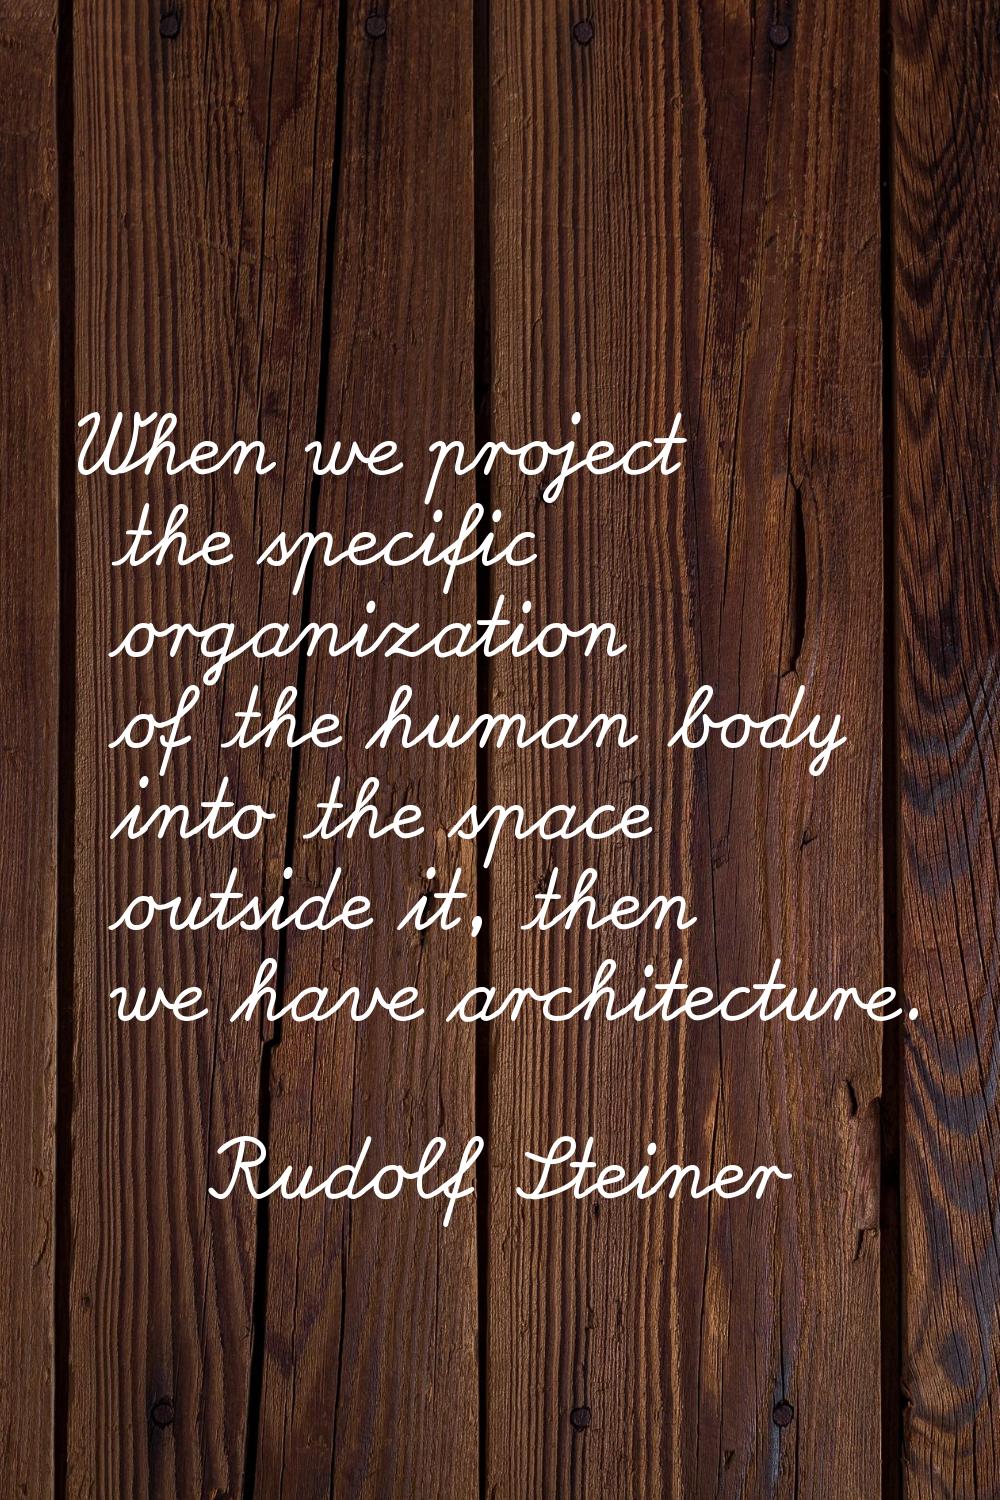 When we project the specific organization of the human body into the space outside it, then we have